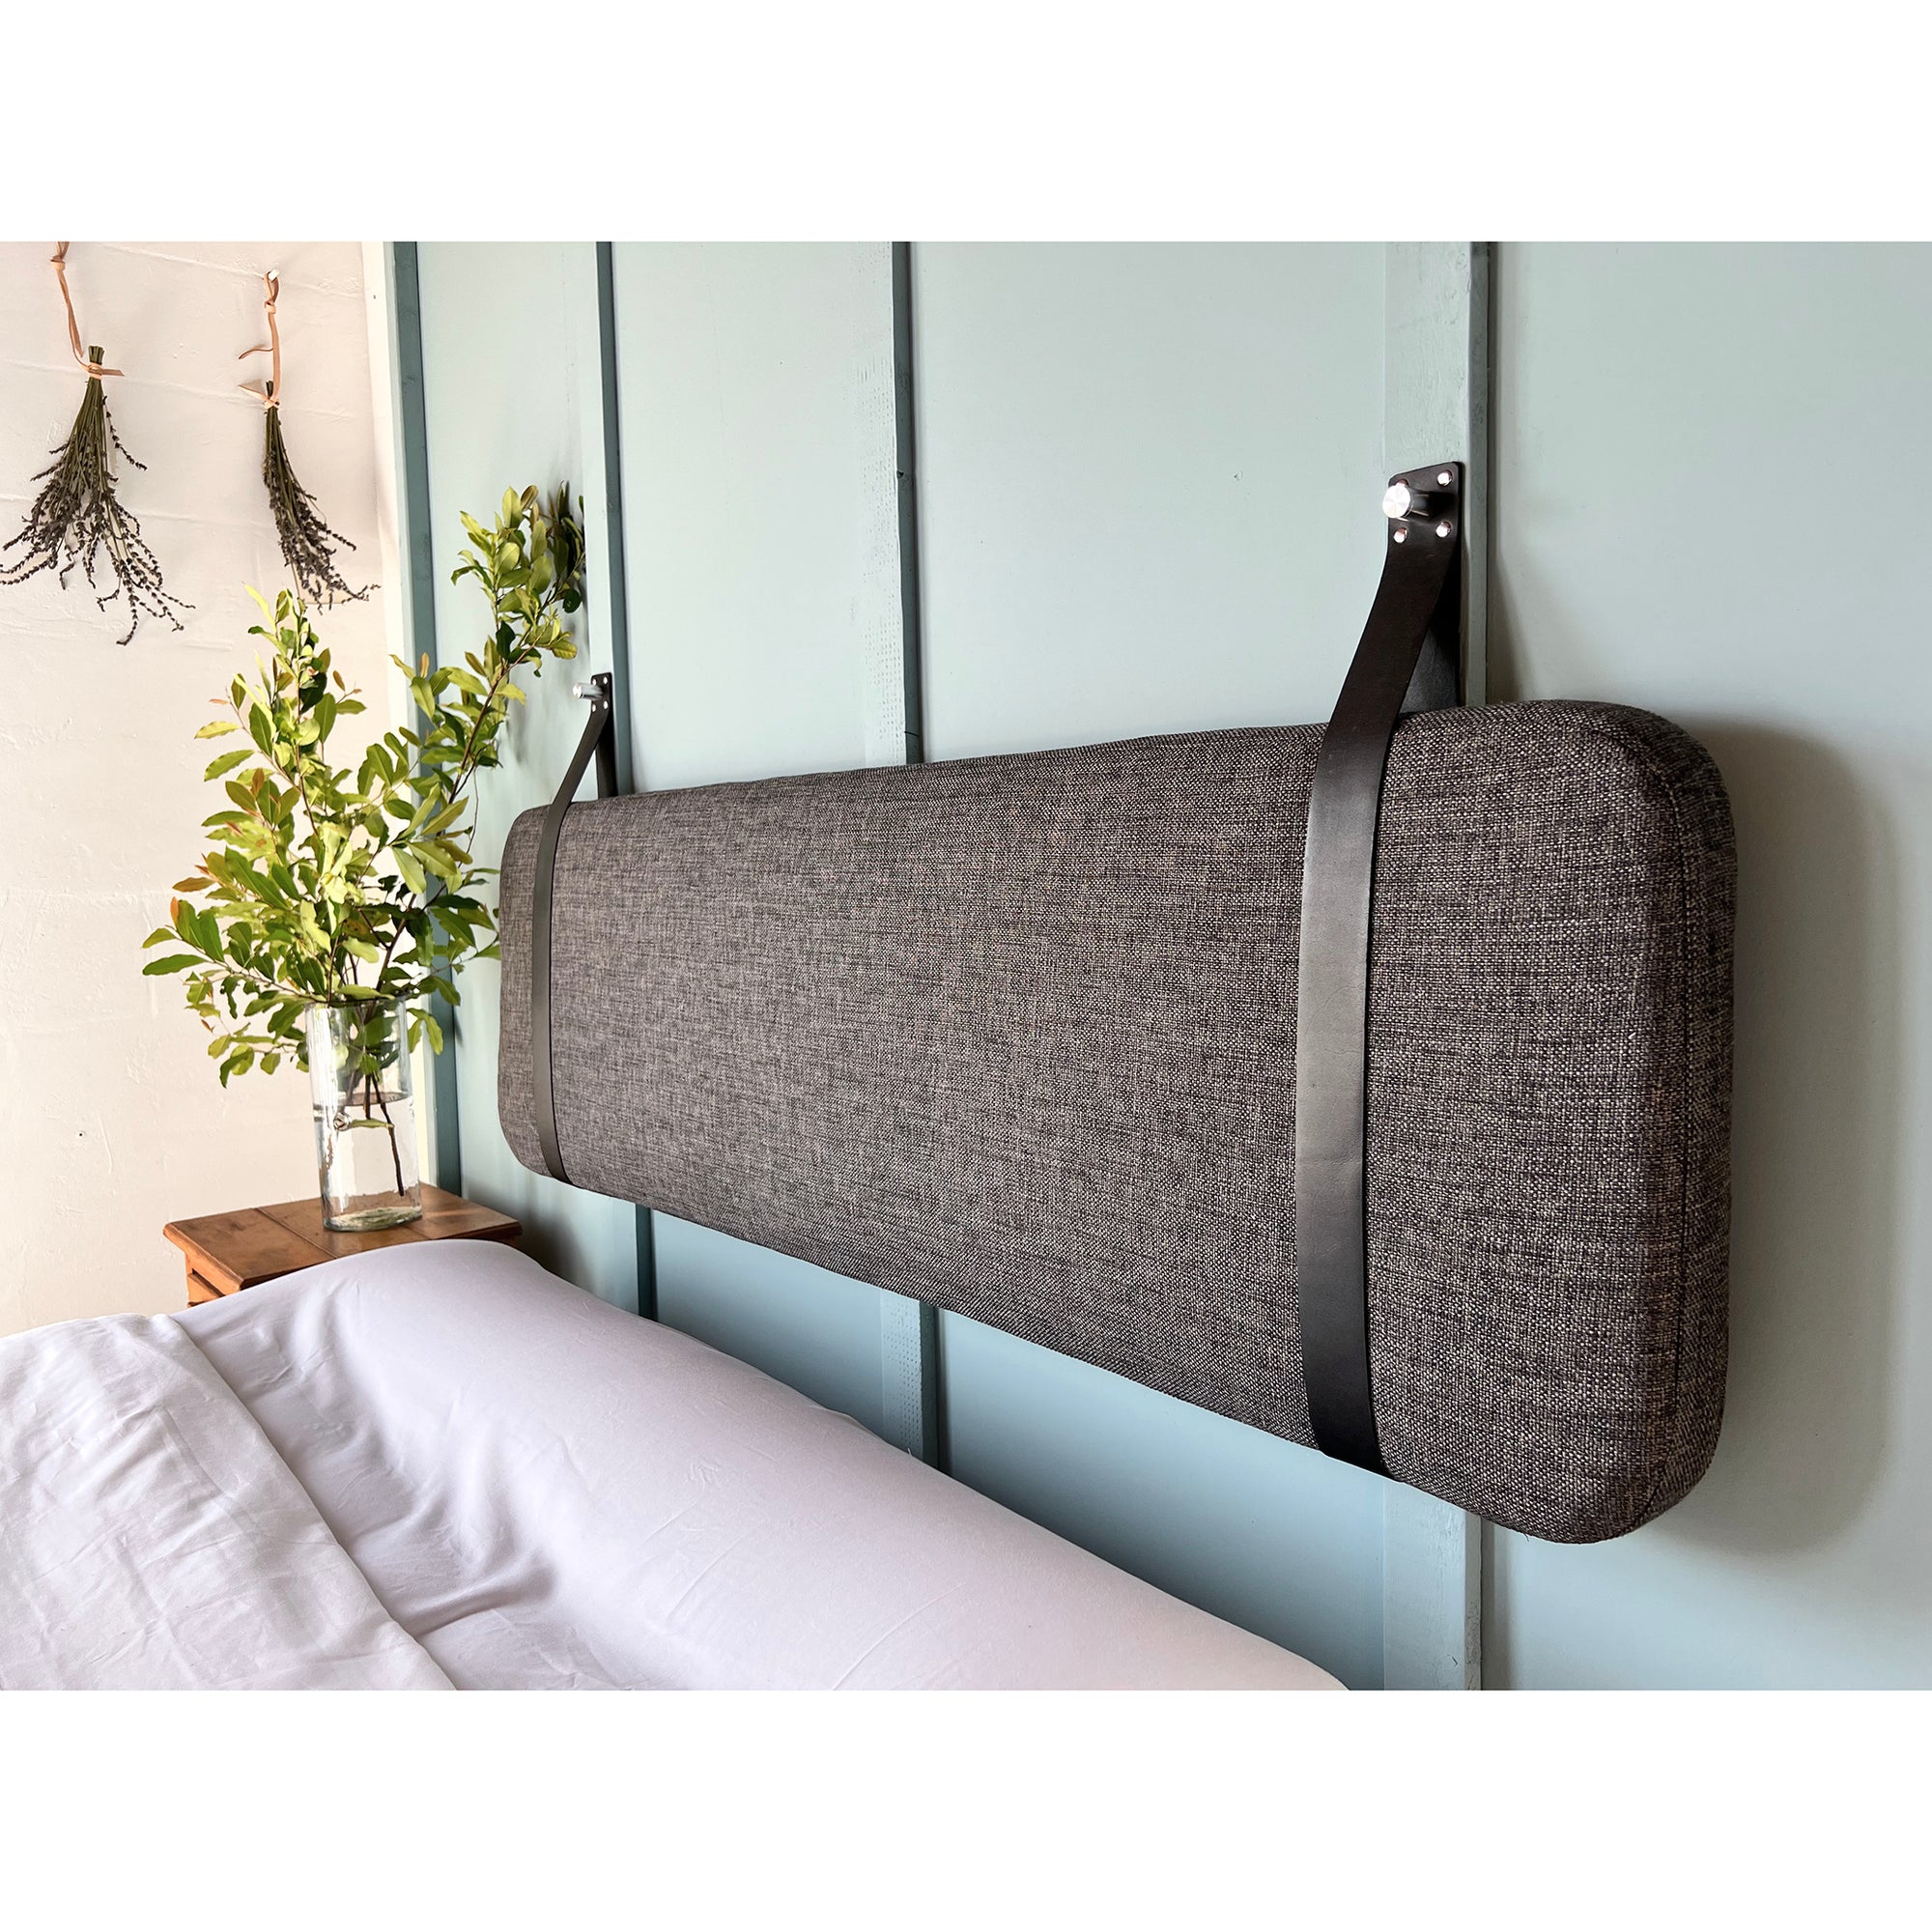 Charcoal Gray - Wall Hung Headboard Cushion with Leather Straps - Multiple Sizes Available